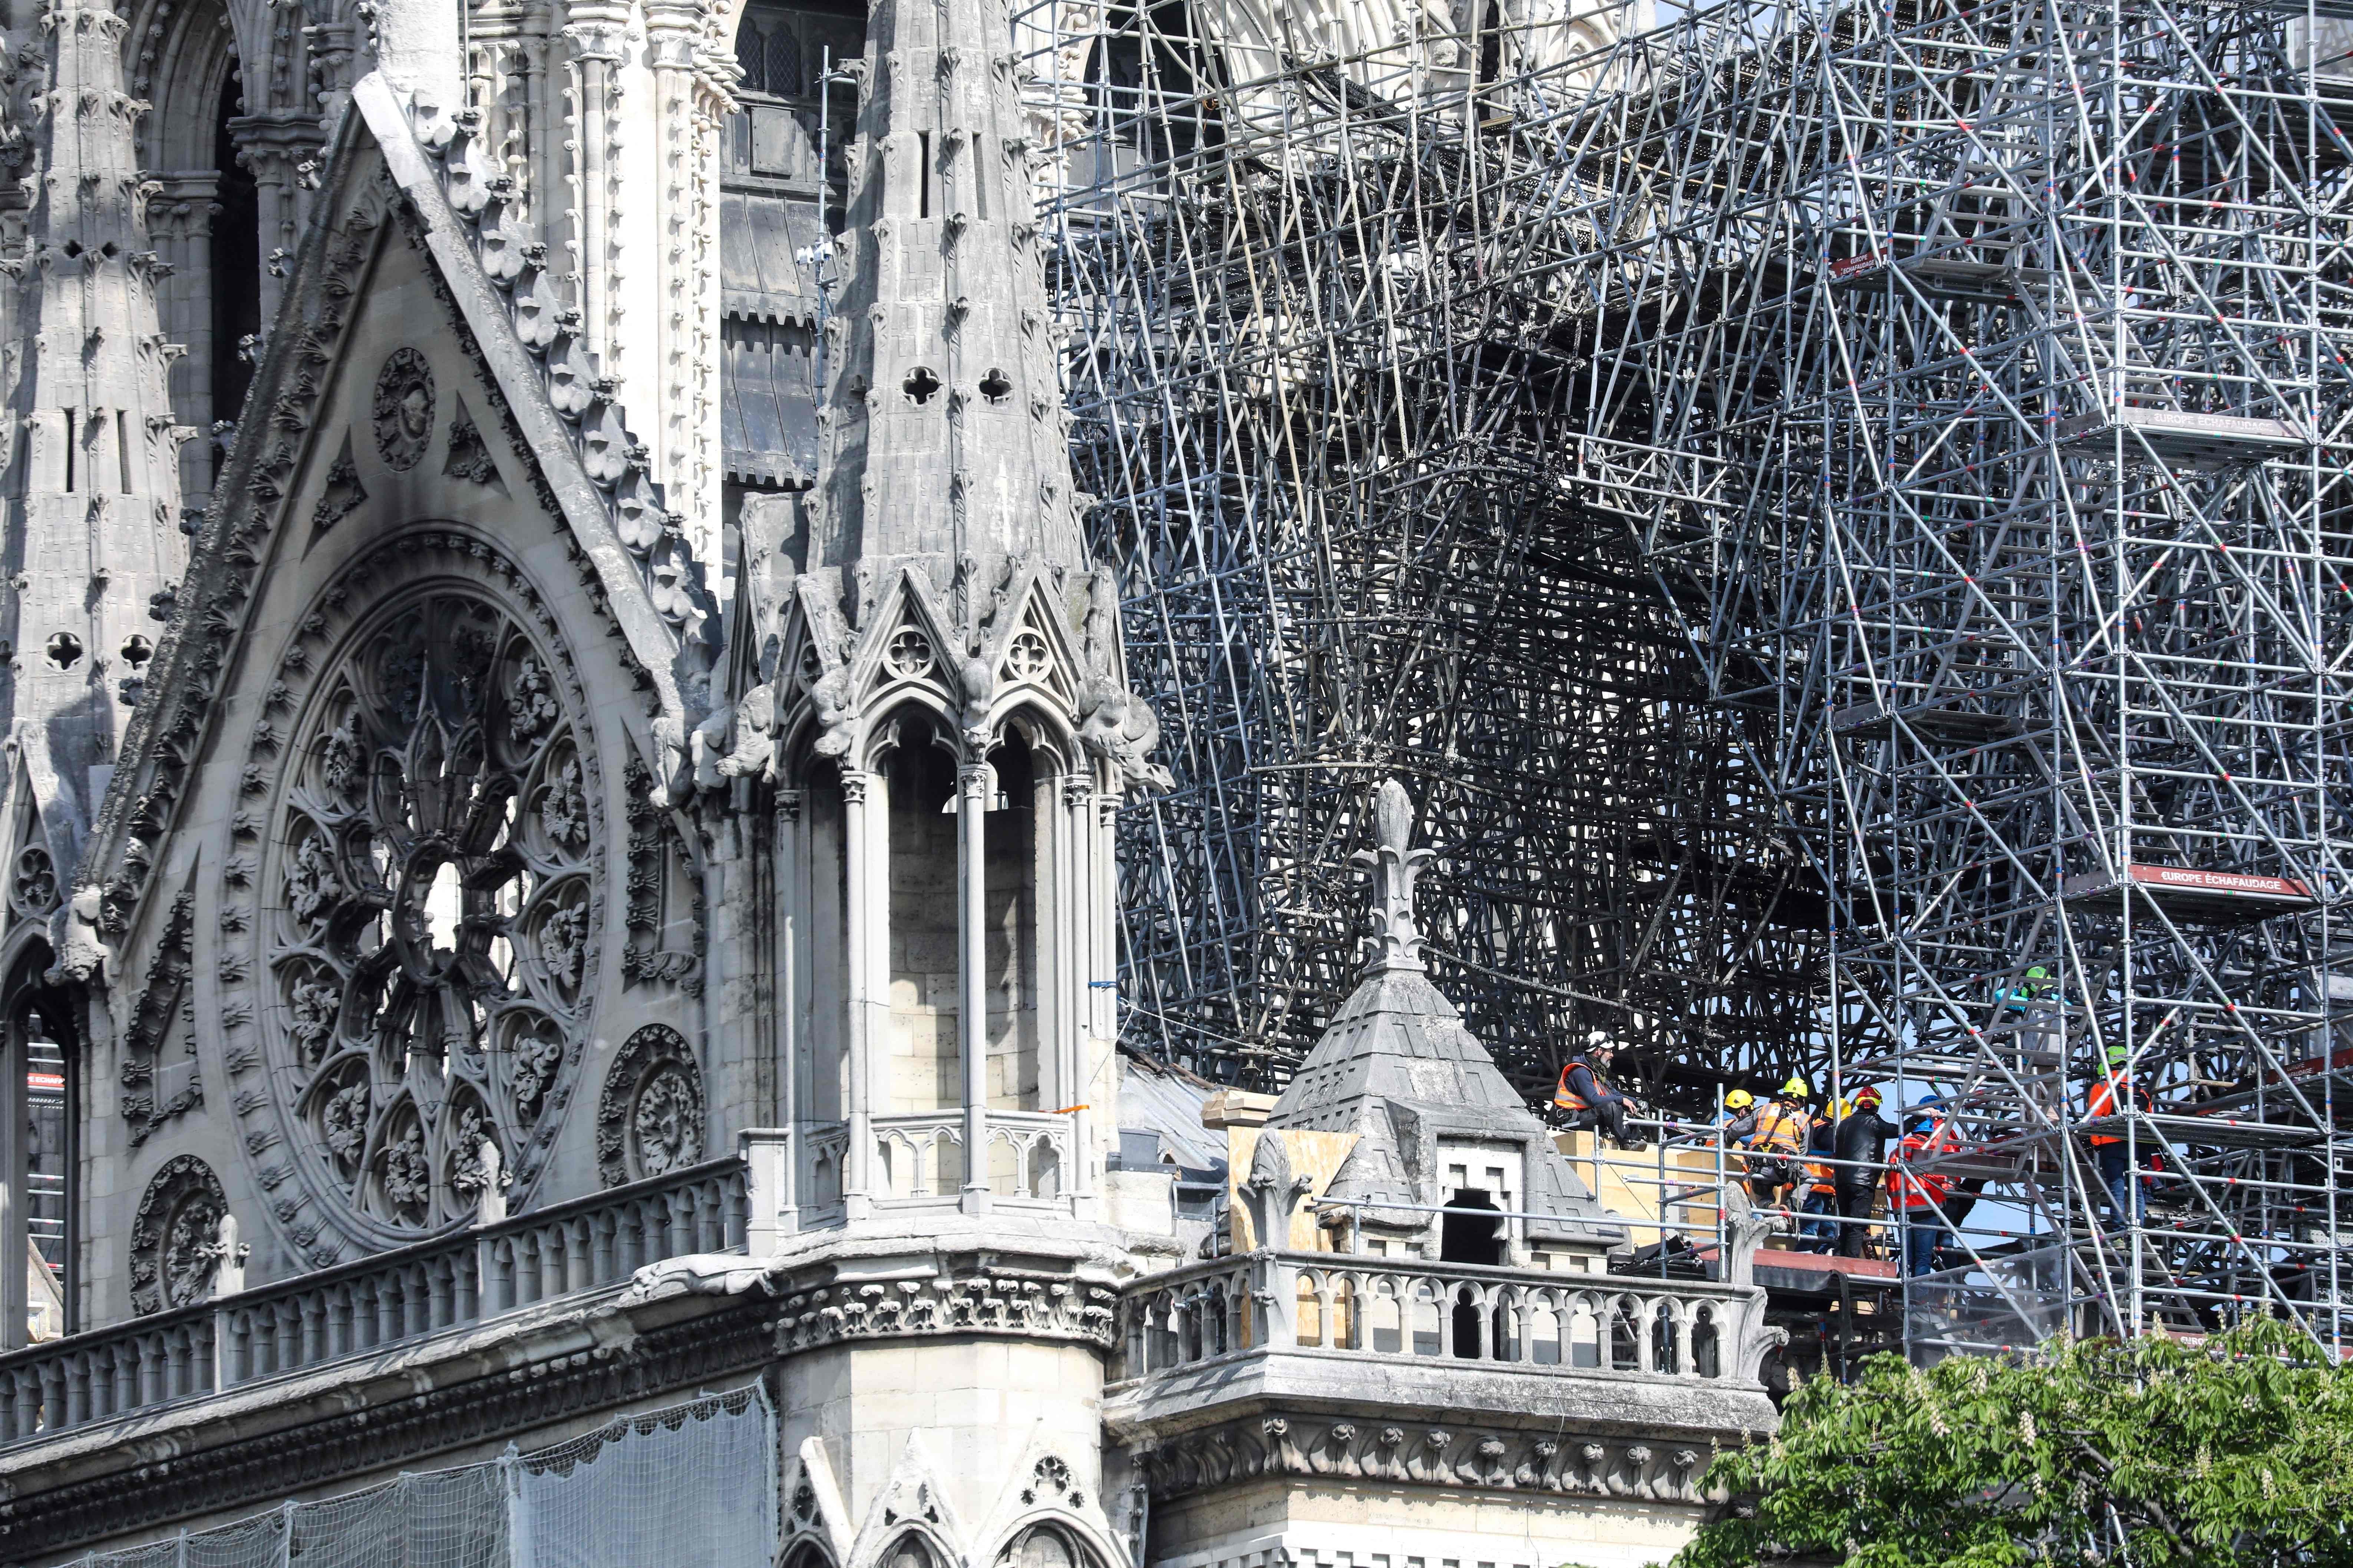 LMVH and Kering’s owners contributed to the €1 billion-plus raised for the restoration of Notre-Dame de Paris cathedral after it was badly damaged by fire in April 2019. Photo: AFP